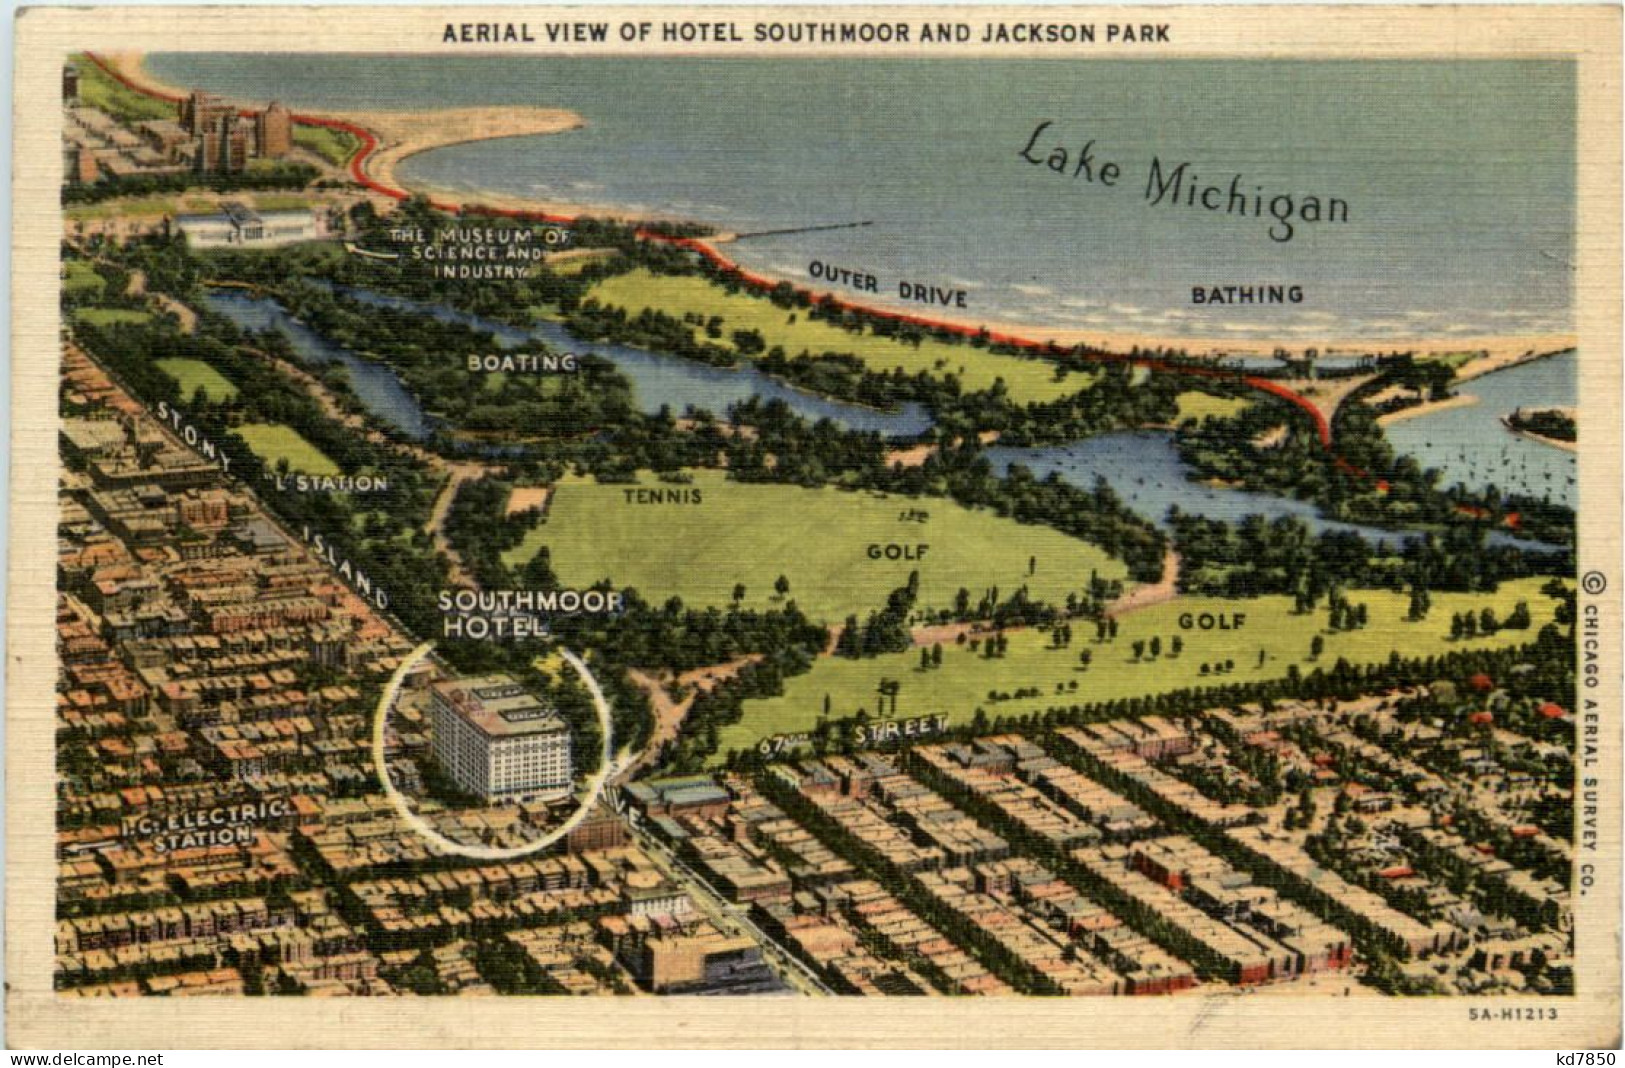 Chicago - Hotel Southmoor And Jackson Park - Chicago